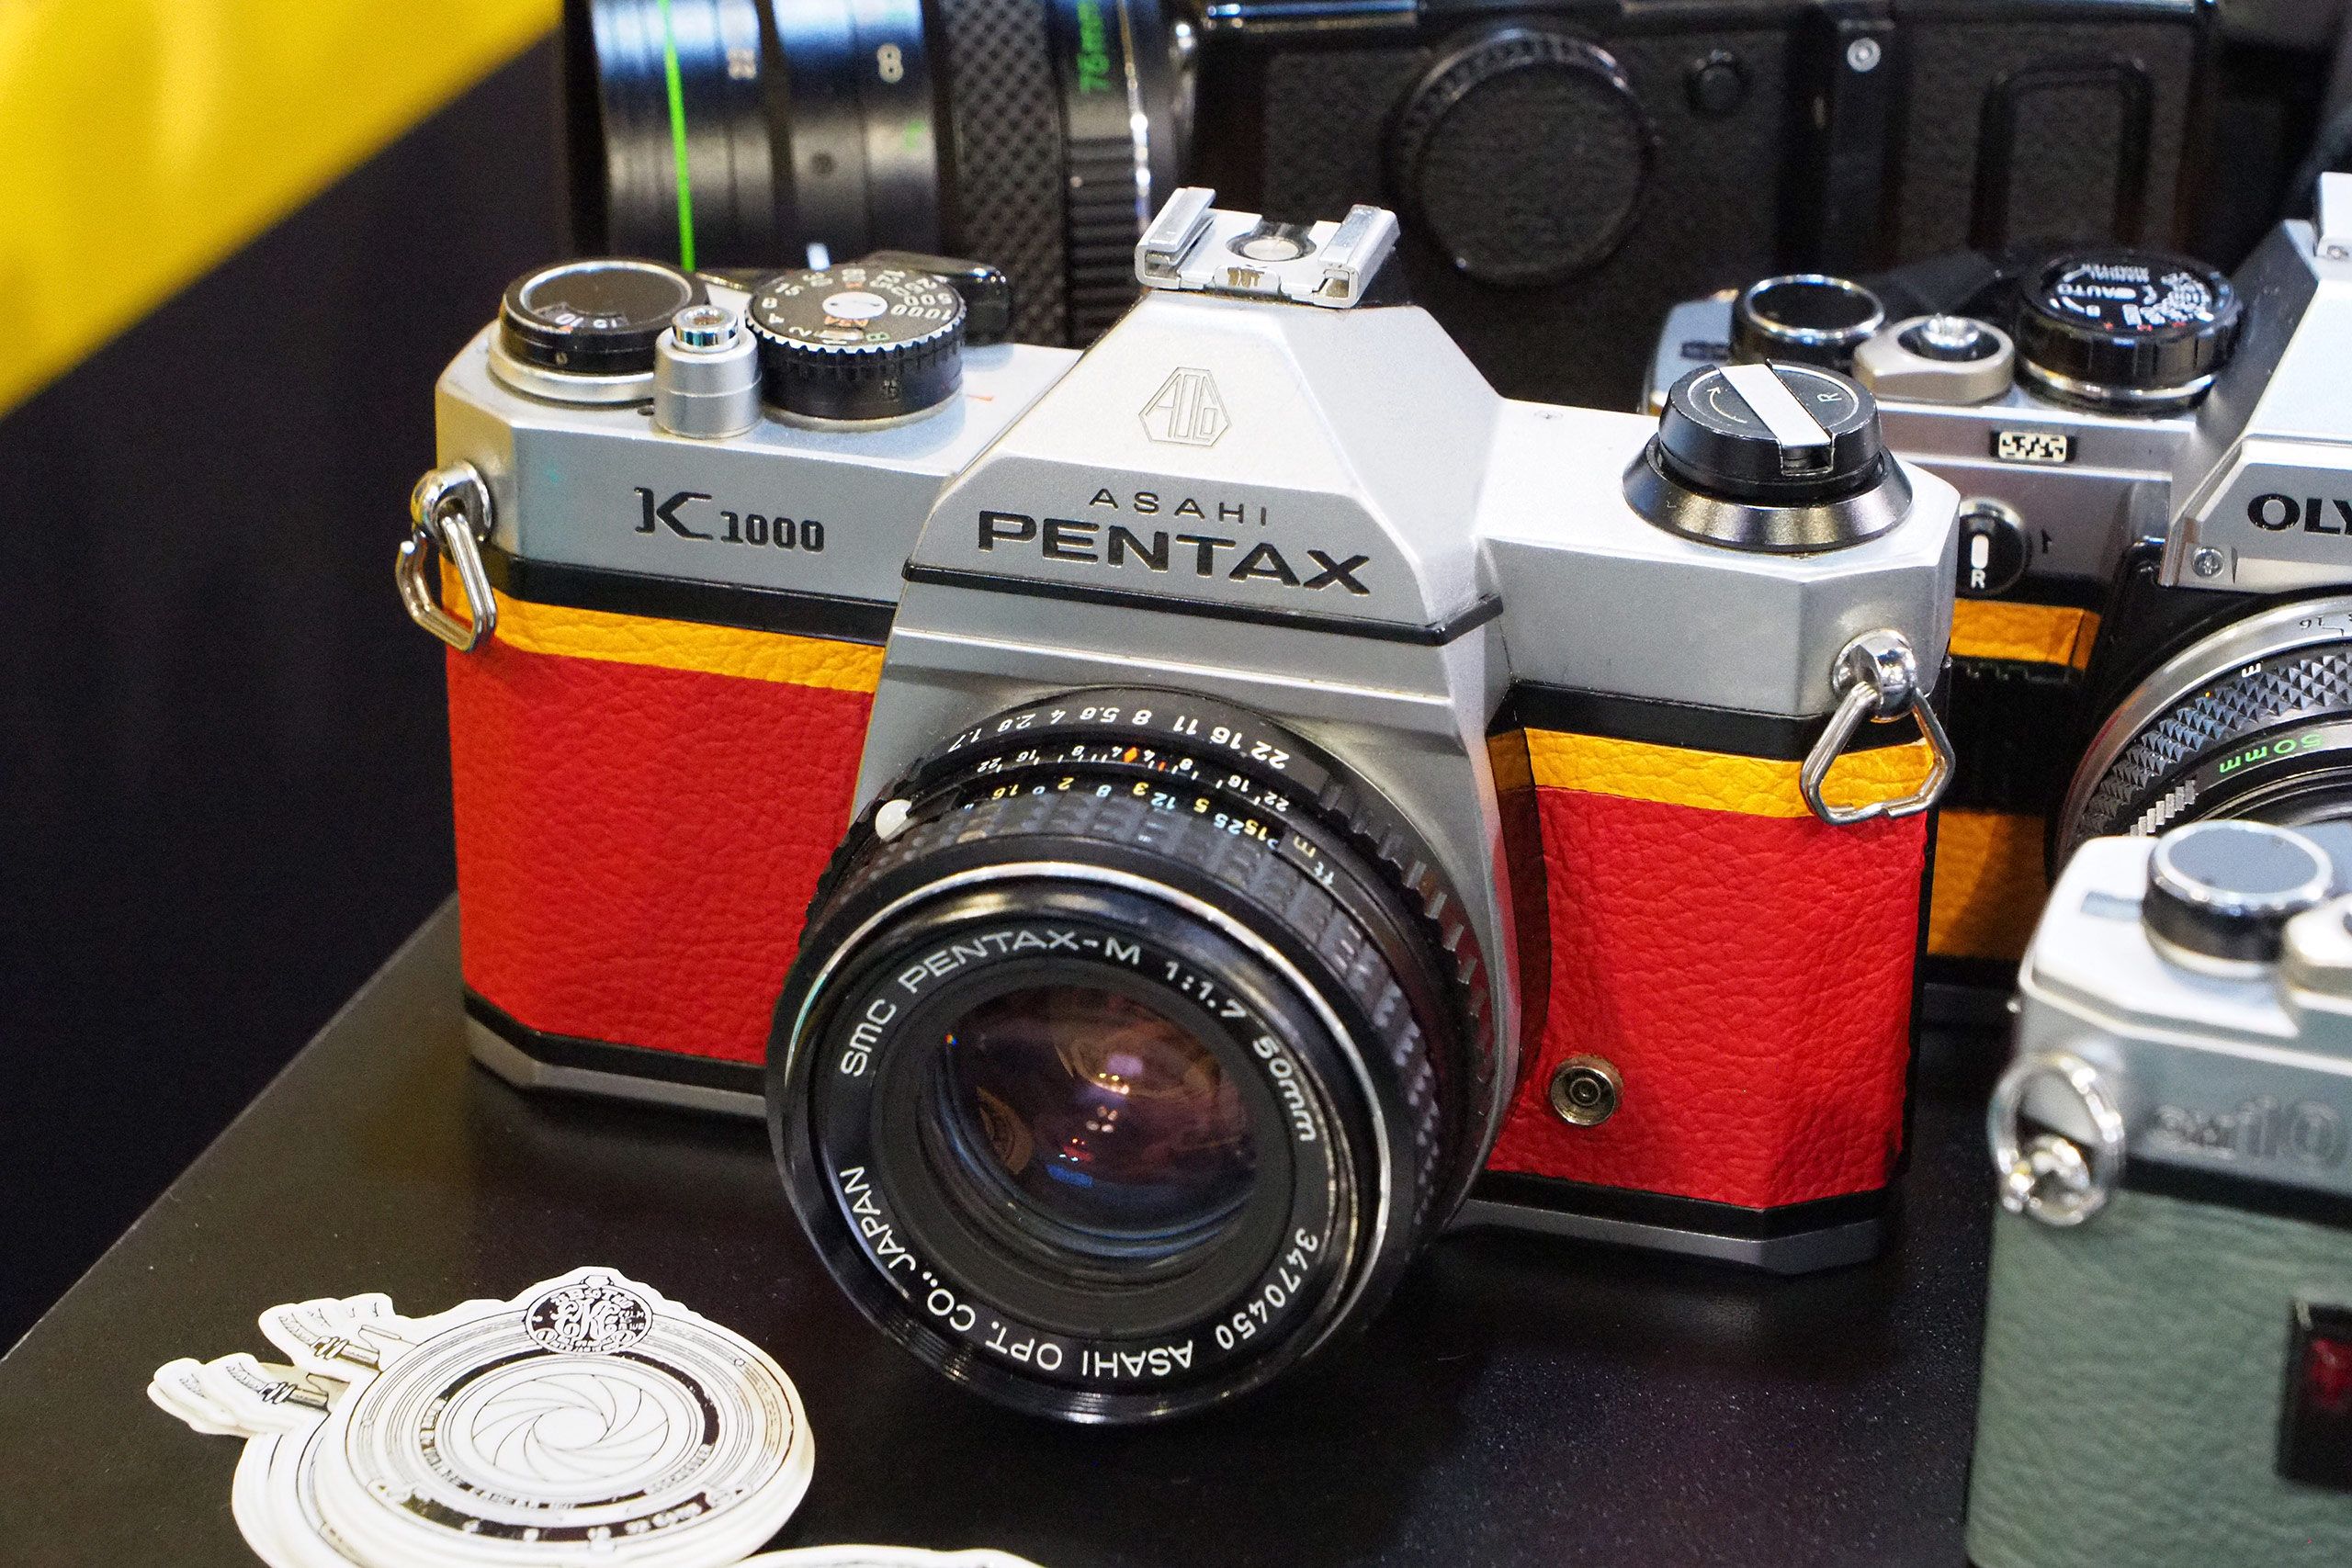 Vintage Camera Hut sell reconditioned, and reskinned 35mm film cameras, including this smart looking Pentax K1000